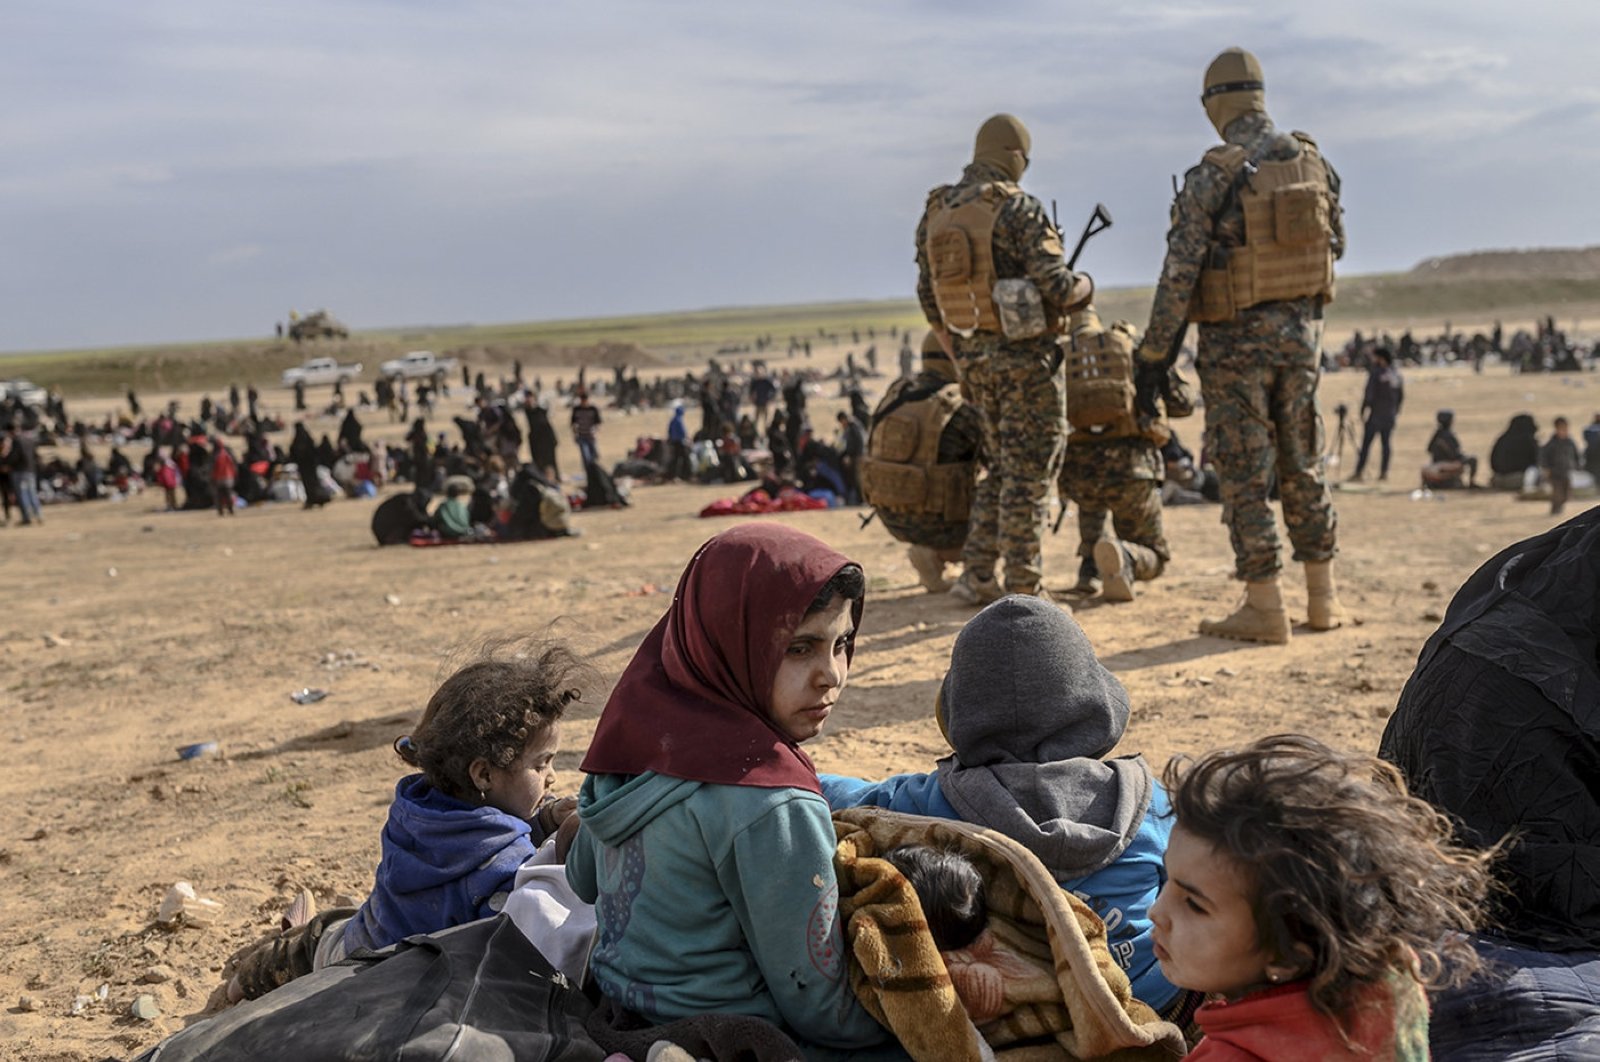 Civilians evacuated from the Daesh group's embattled holdout of Baghouz wait at a screening area held by U.S.-backed YPG/PKK terrorists, in the northeastern Syrian province of Deir el-Zour, March 5, 2019. (AFP File Photo)